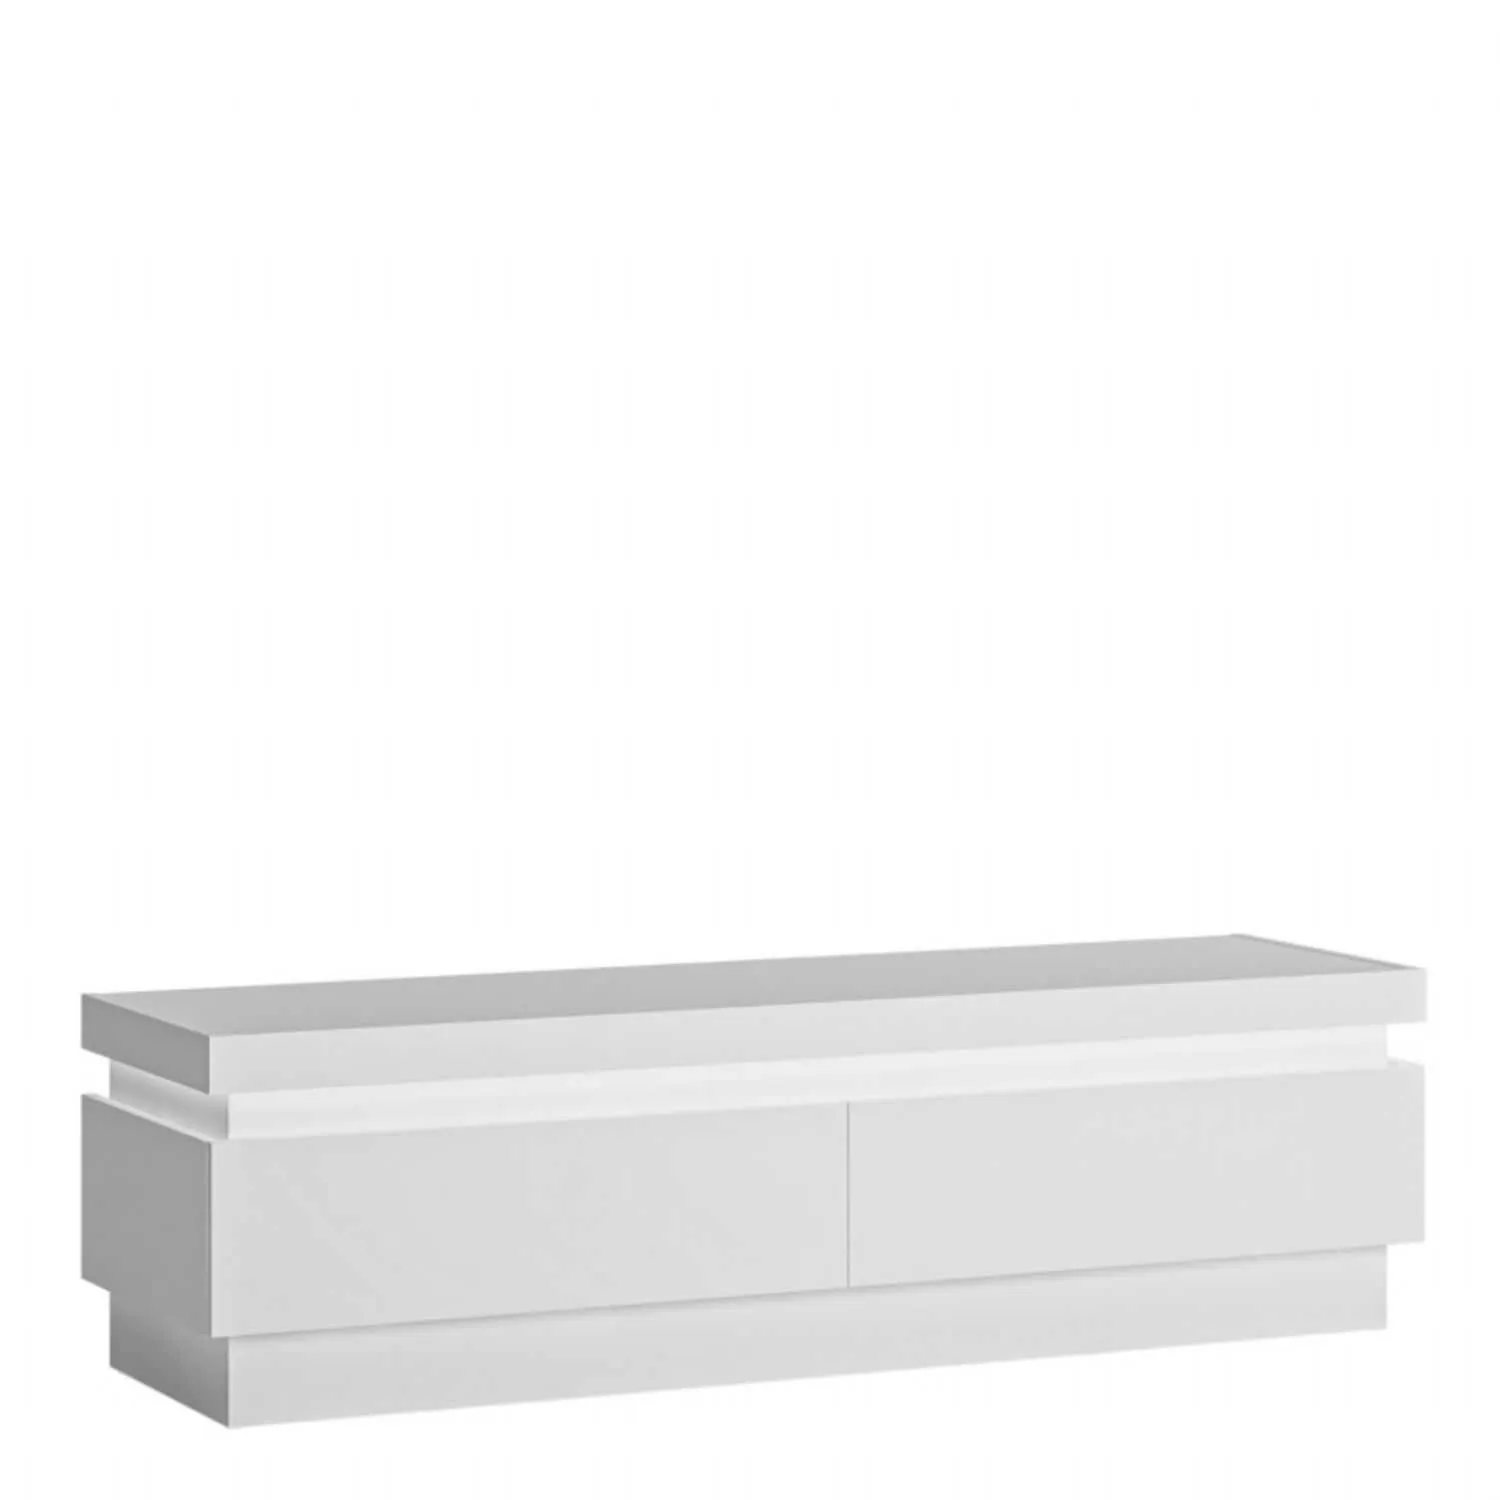 White and High Gloss 2 Drawer TV Cabinet with LED Lighting 41x146cm